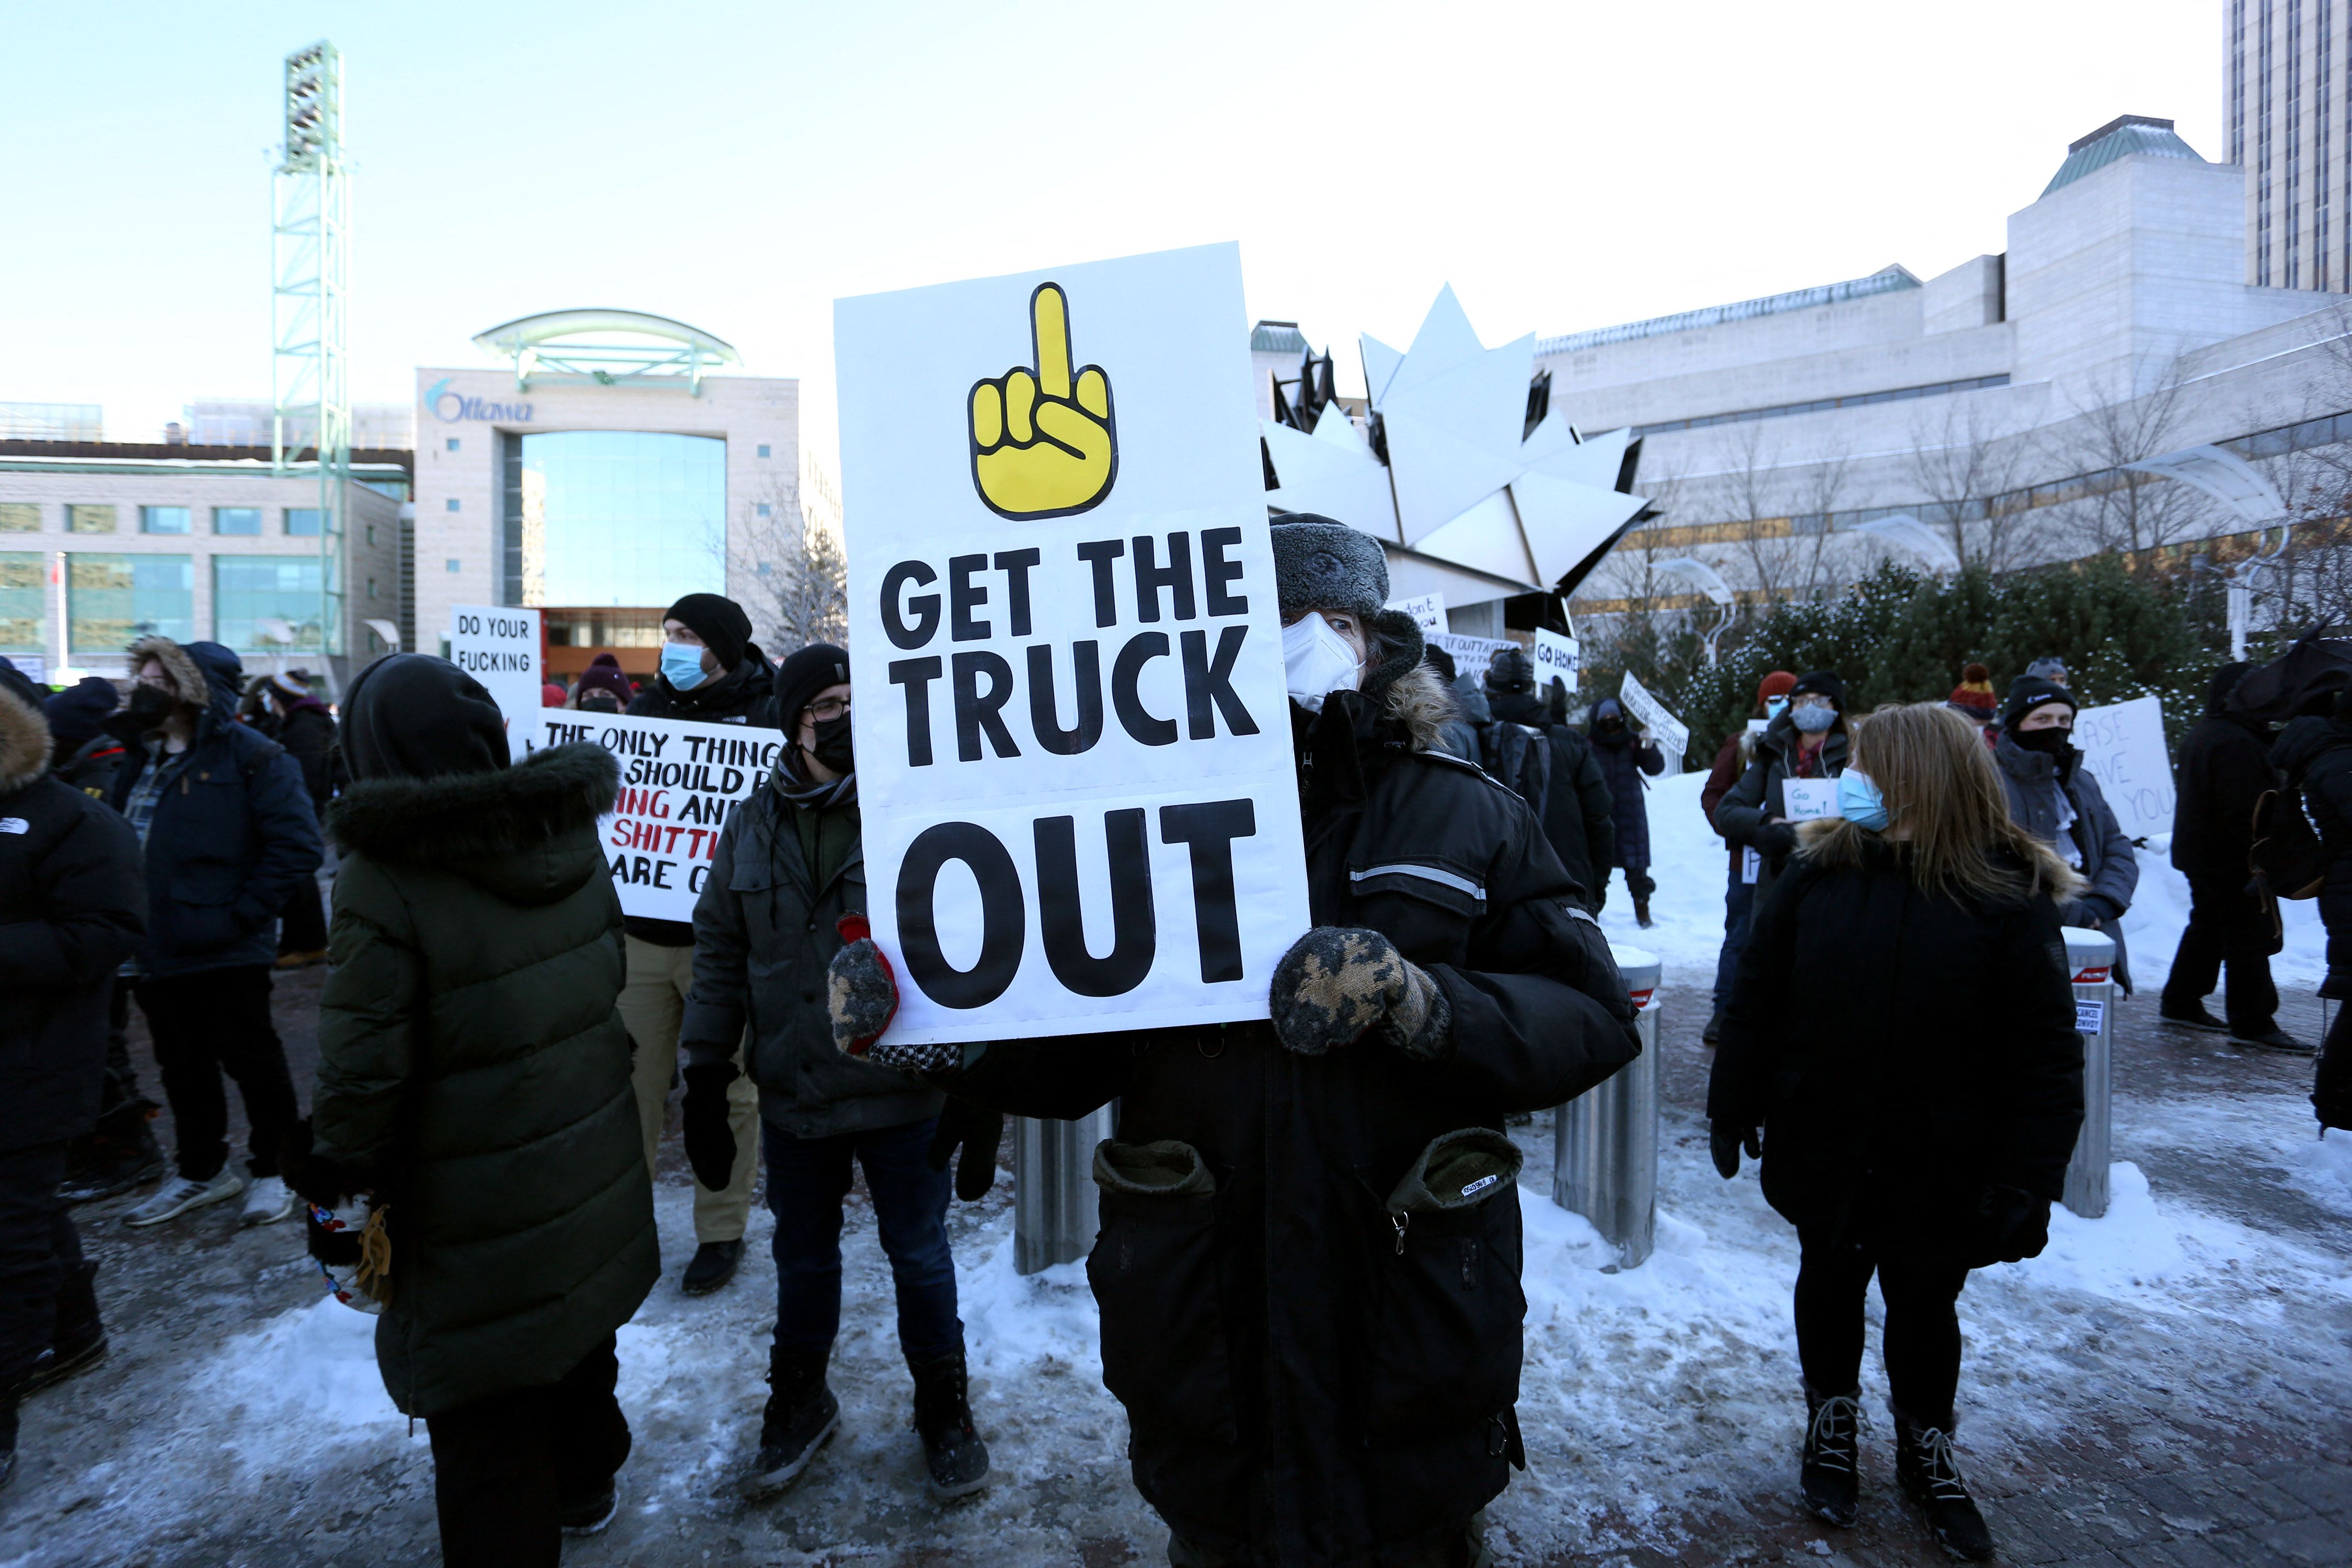 A protester holds a sign as truckers and supporters protest against mandates and restrictions related to Covid-19 vaccines